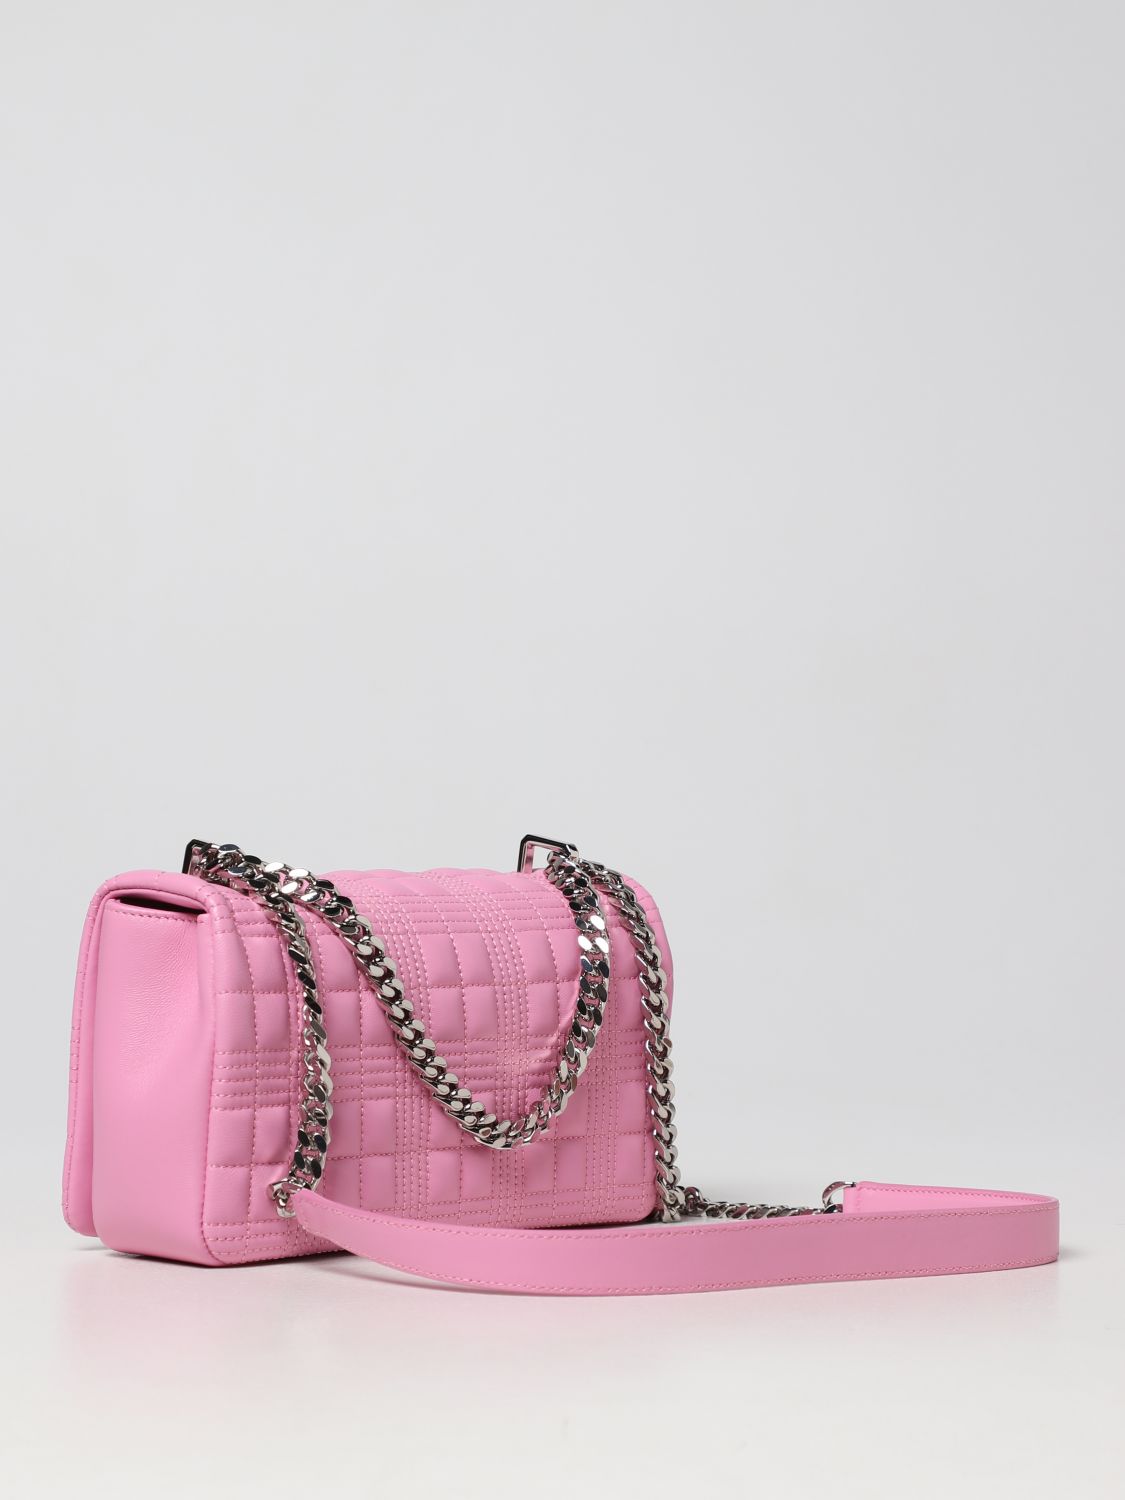 Sold at Auction: BURBERRY 'LOLA' PINK QUILTED LEATHER SHOULDER BAG